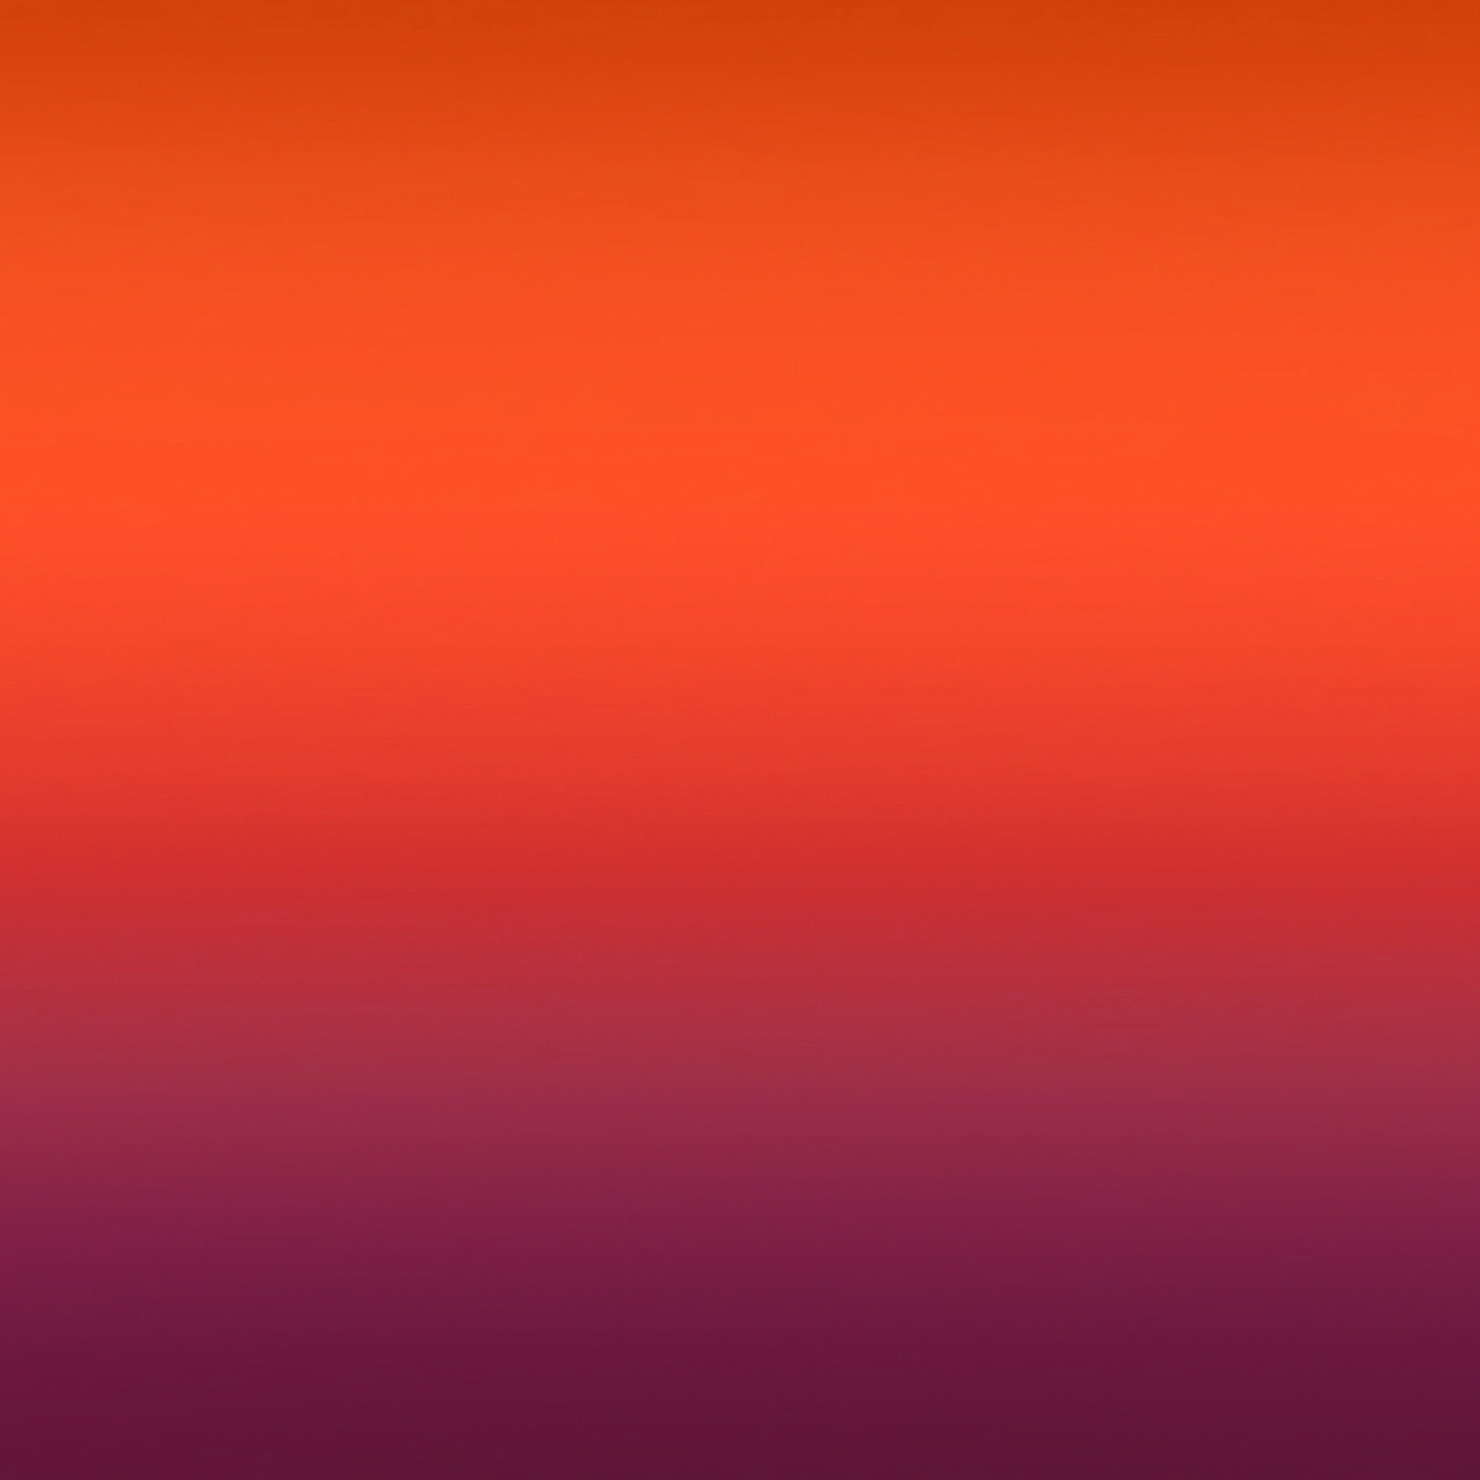 Gradation Color Wallpaper for Mobile Phone Background ...